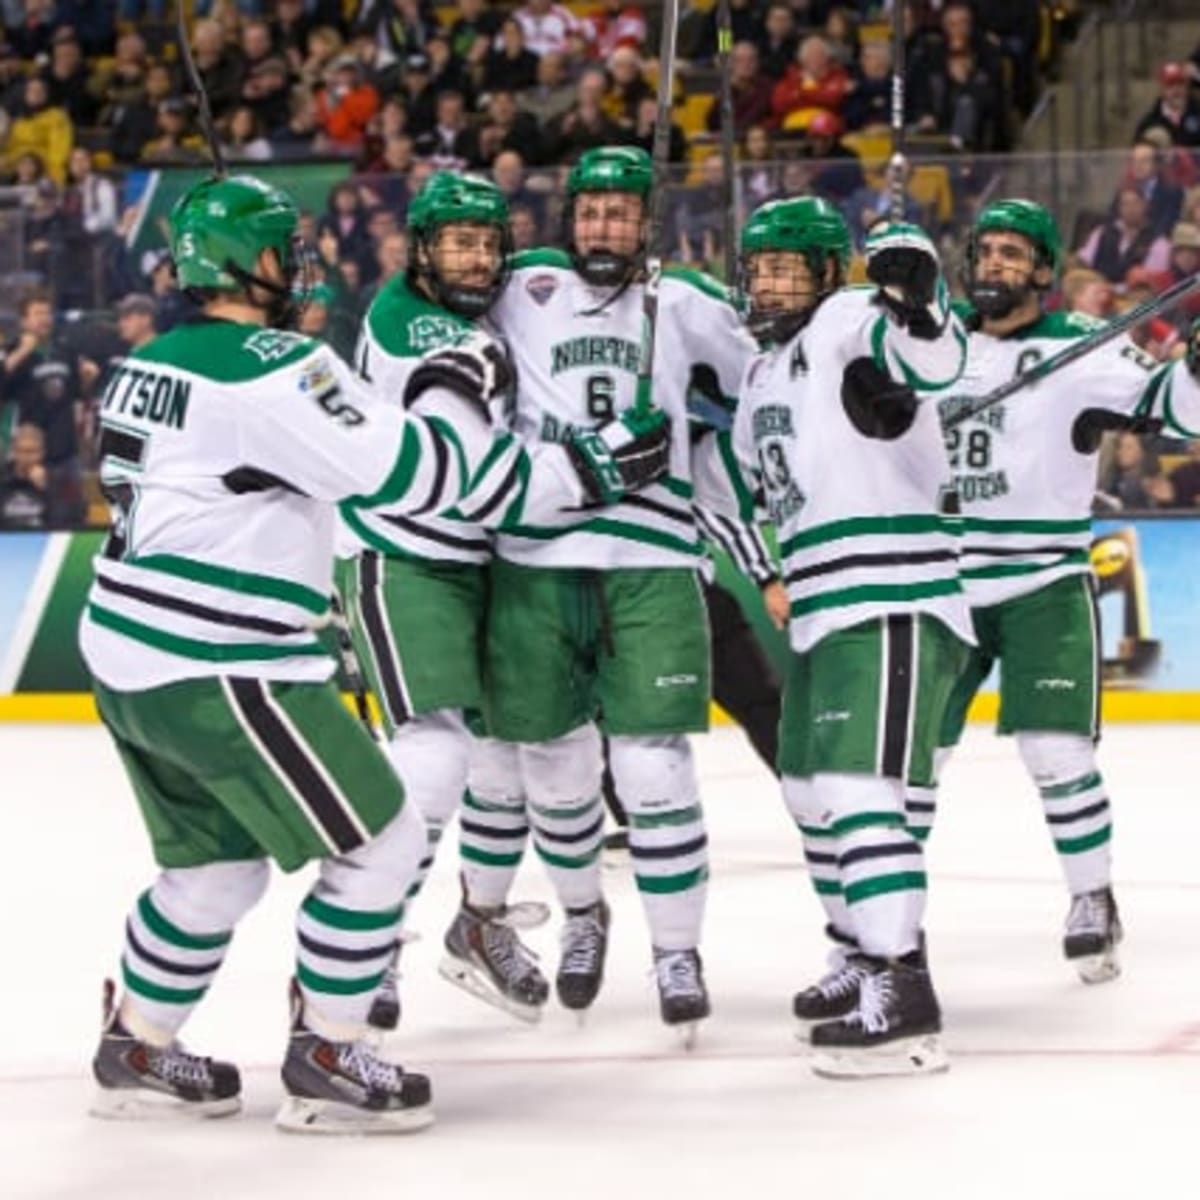 The Sioux Nickname Is Gone, but North Dakota Hockey Fans Haven't